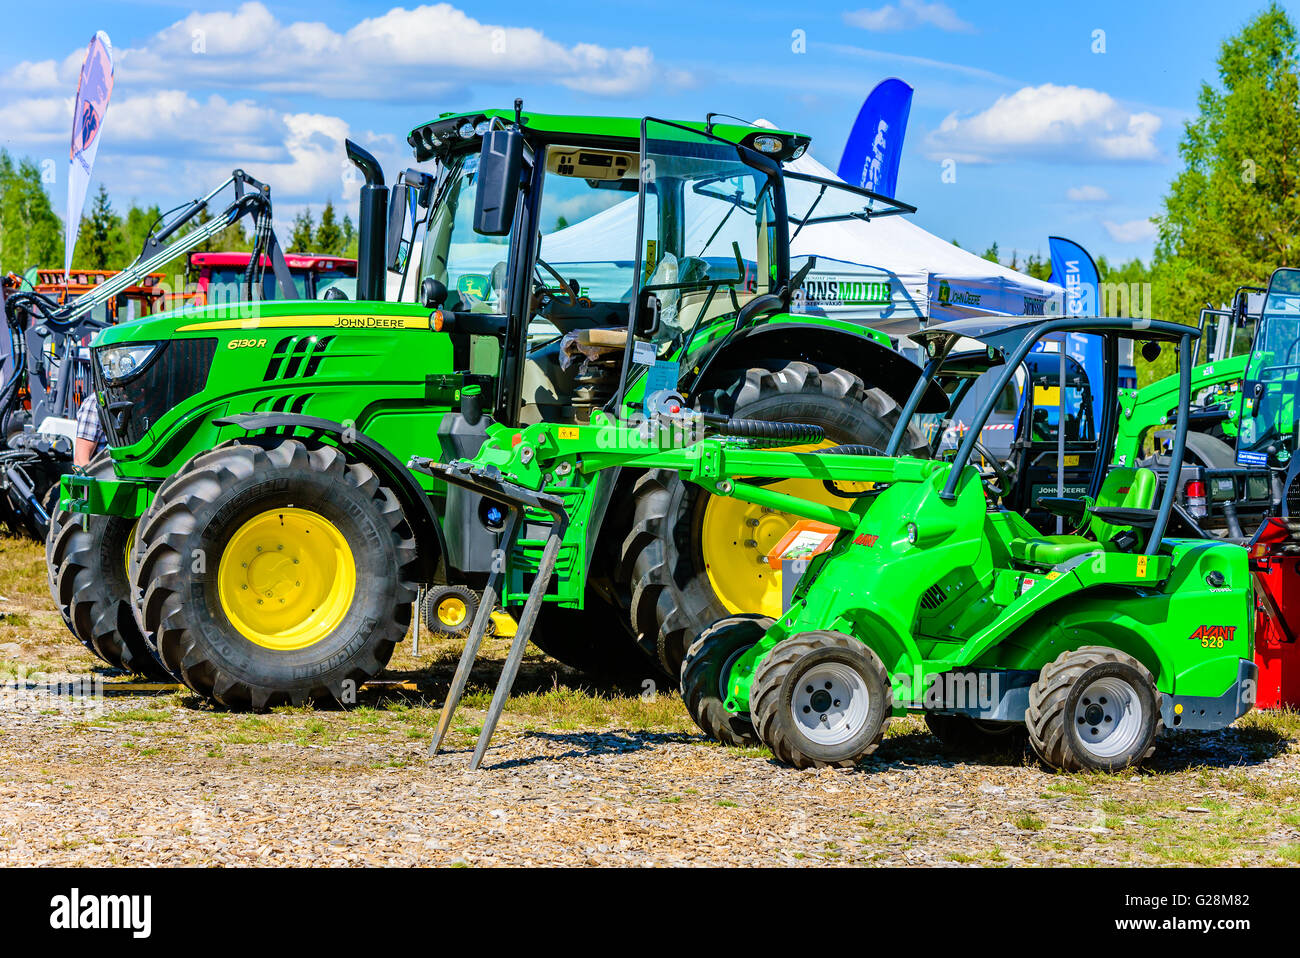 Emmaboda, Sweden - May 13, 2016: Forest and tractor (Skog och traktor) fair. Green Avant 528 loader tractor with forklift in fro Stock Photo